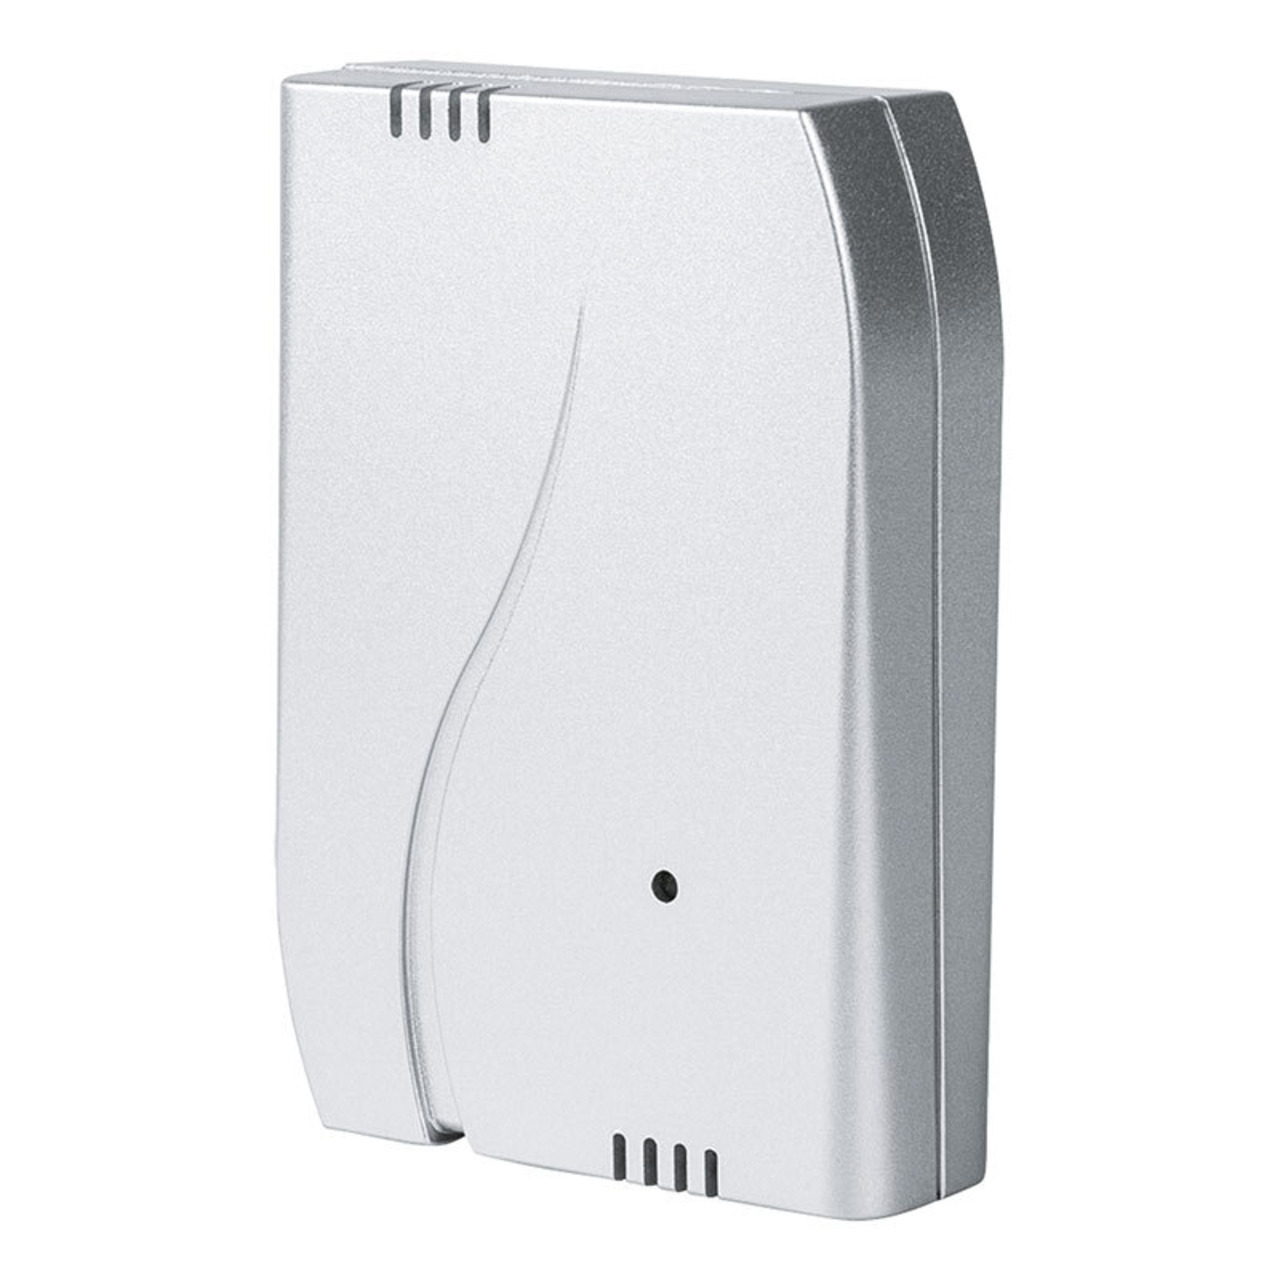 Homematic Funk-Innensensor ITH HM-WDS40-TH-I-2 fr Smart Home - Hausautomation unter Hausautomation